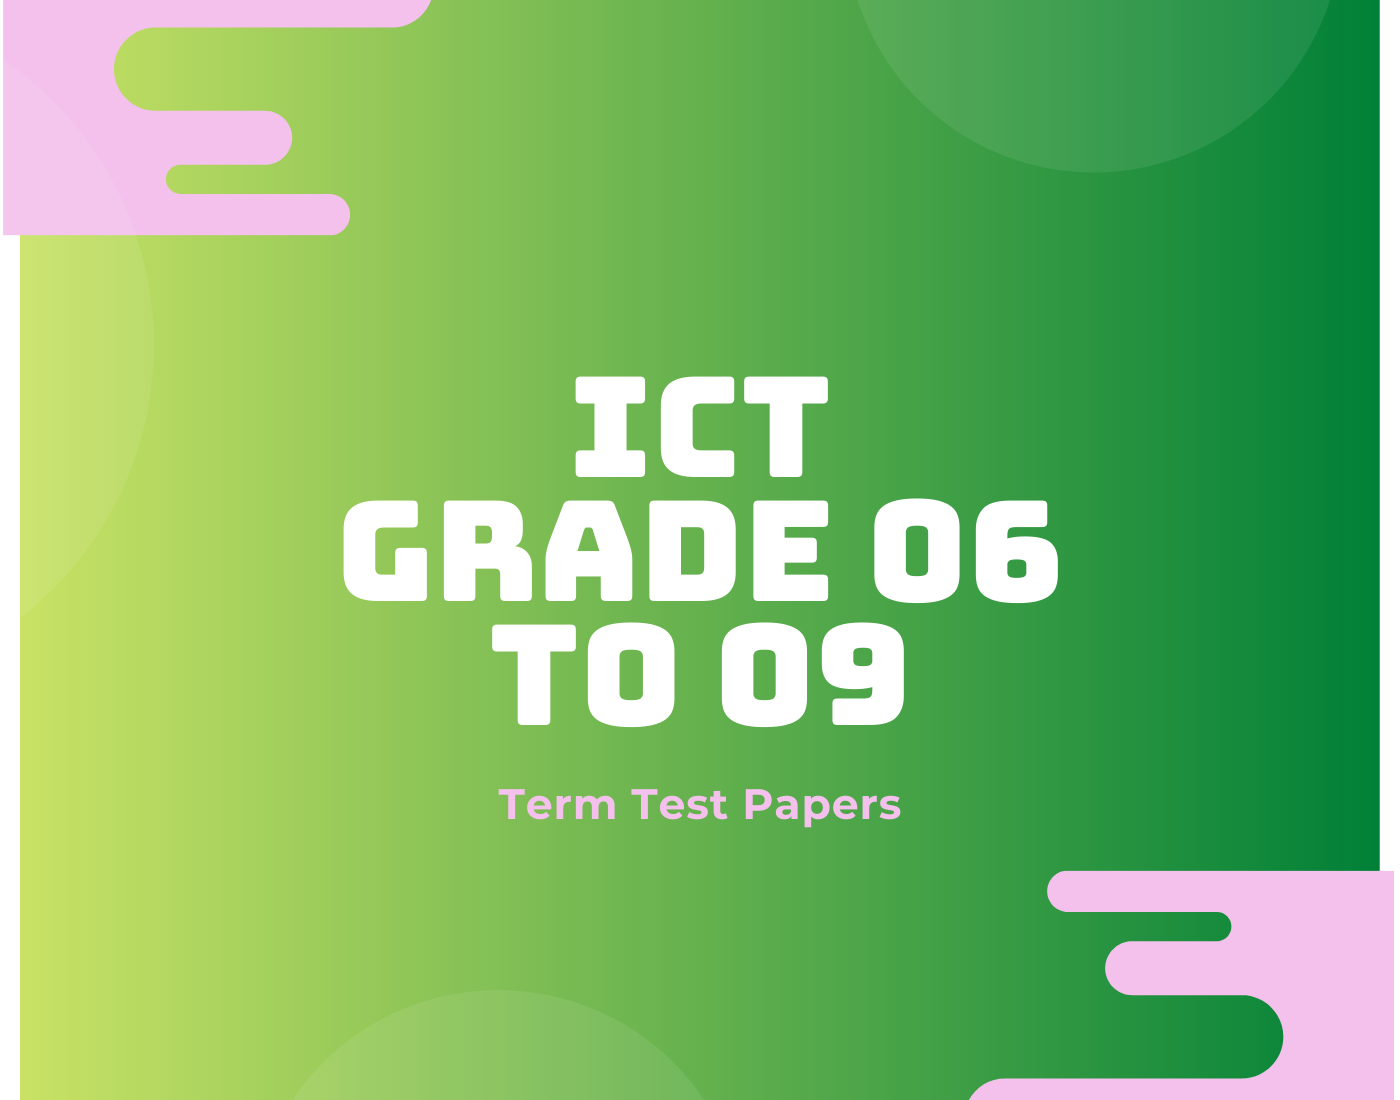 grade-06-to-09-ict-term-test-papers-tamil-medium-ict-tutorials-for-everyone